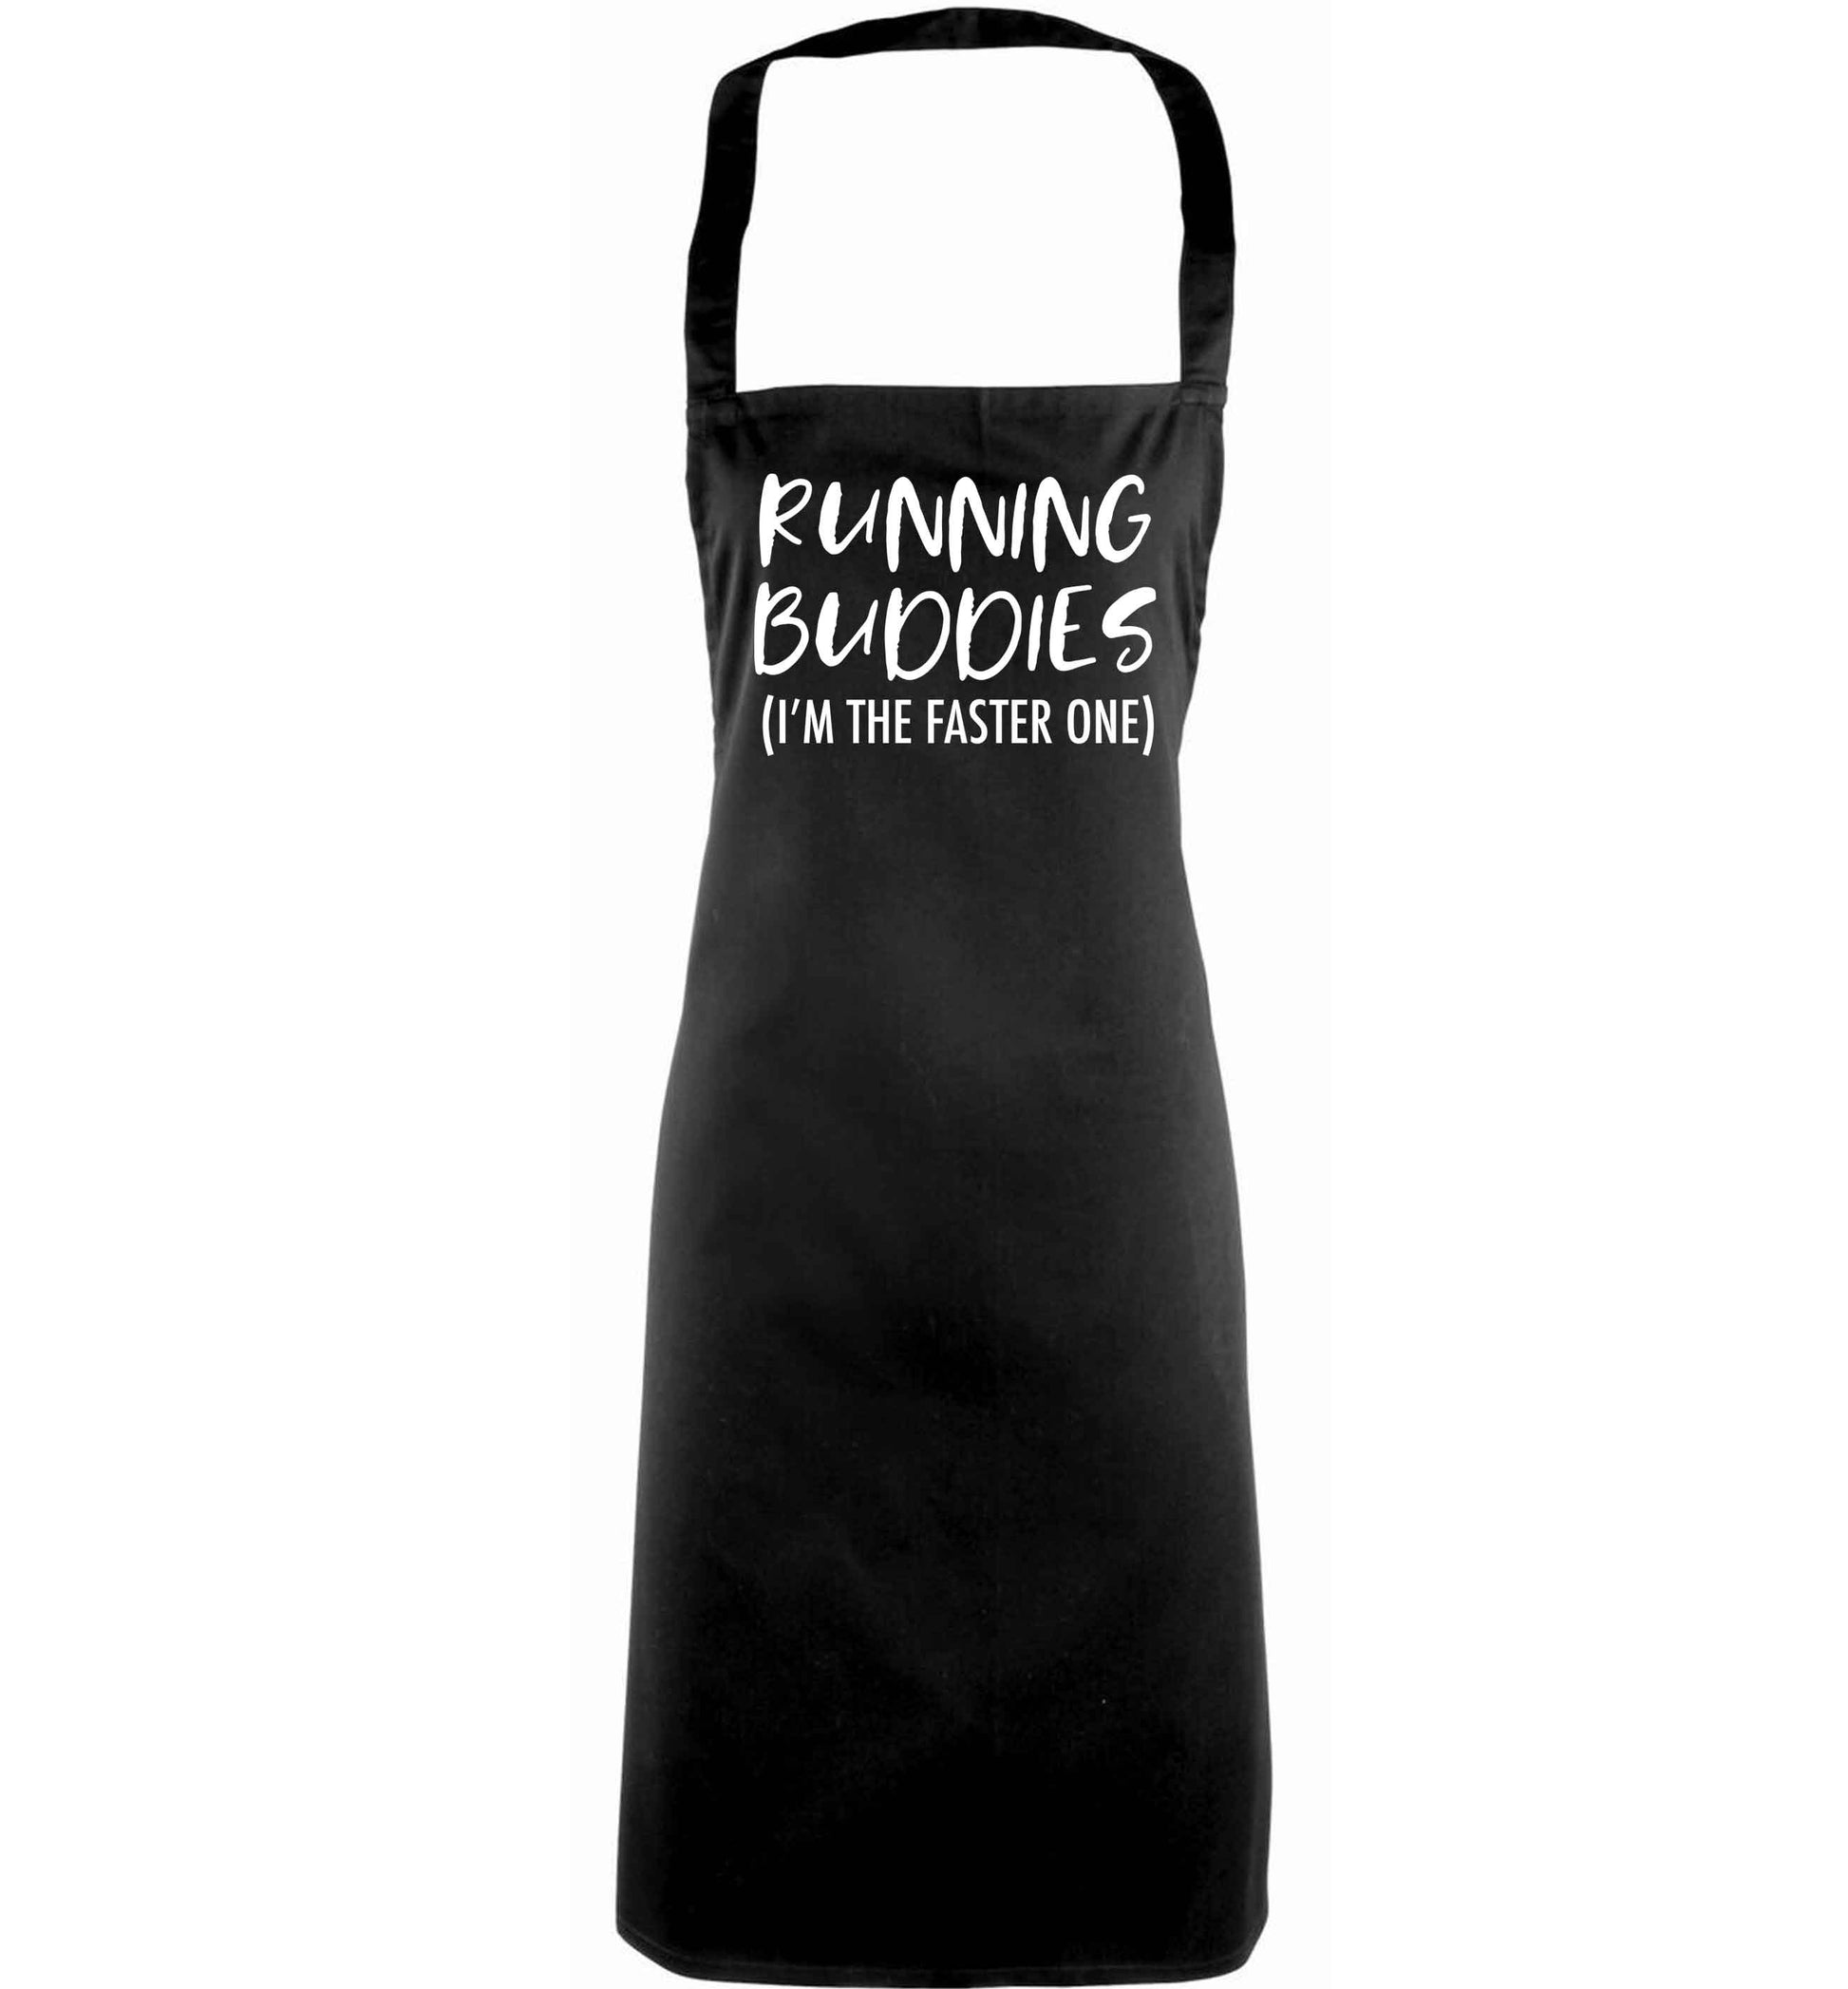 Running buddies (I'm the faster one) adults black apron